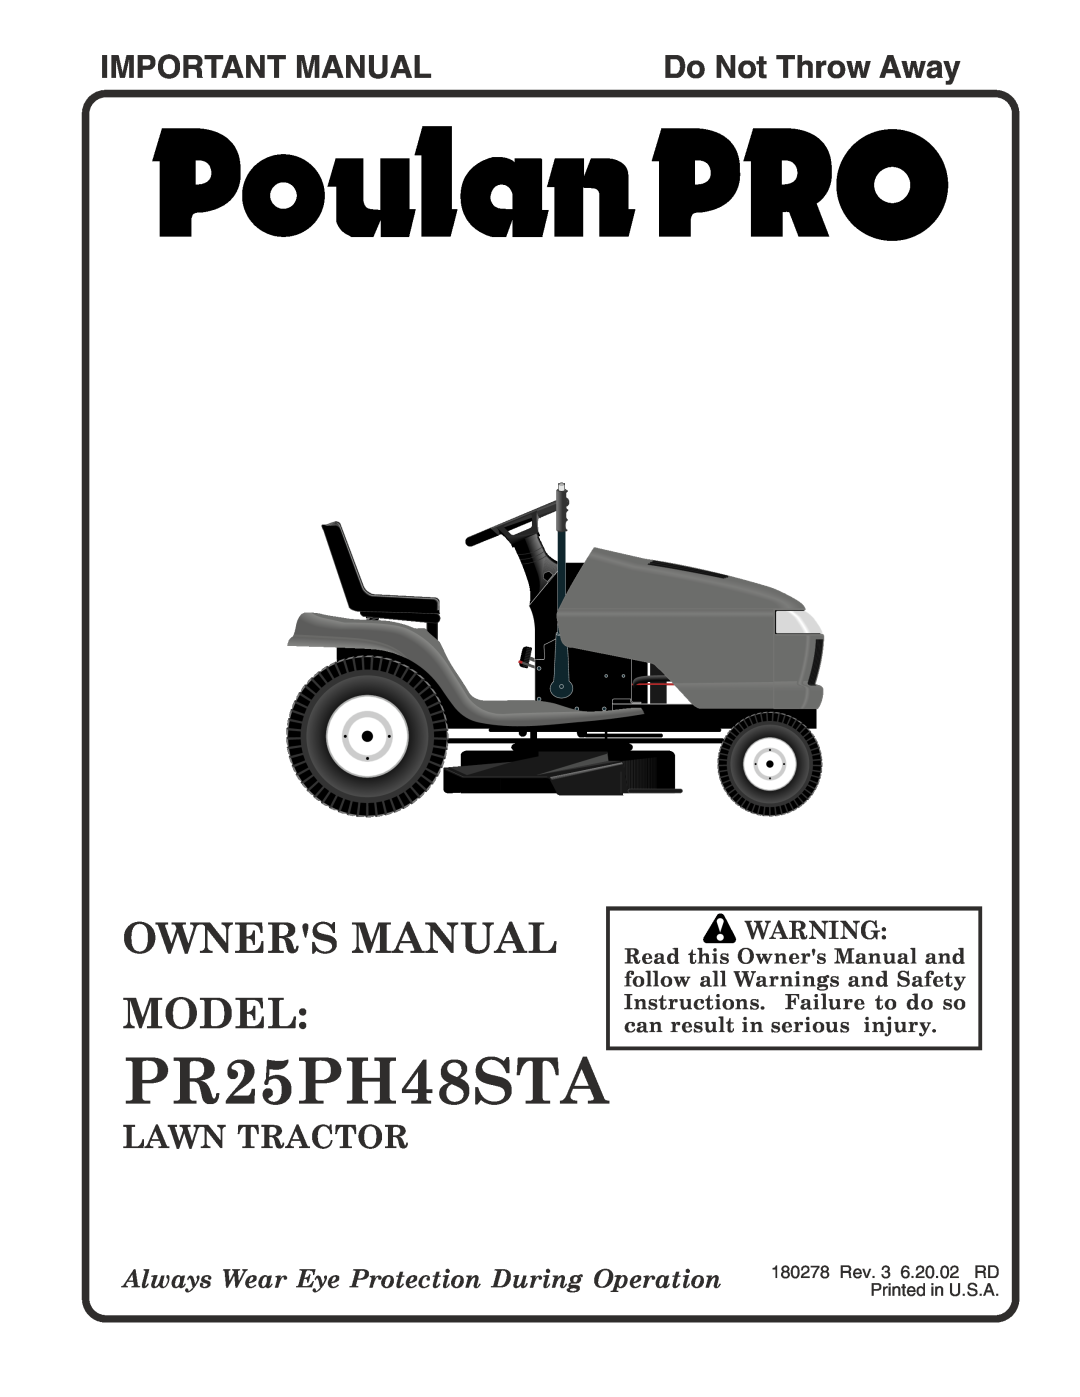 Poulan 180278 owner manual Important Manual, Do Not Throw Away, PR25PH48STA, Lawn Tractor 